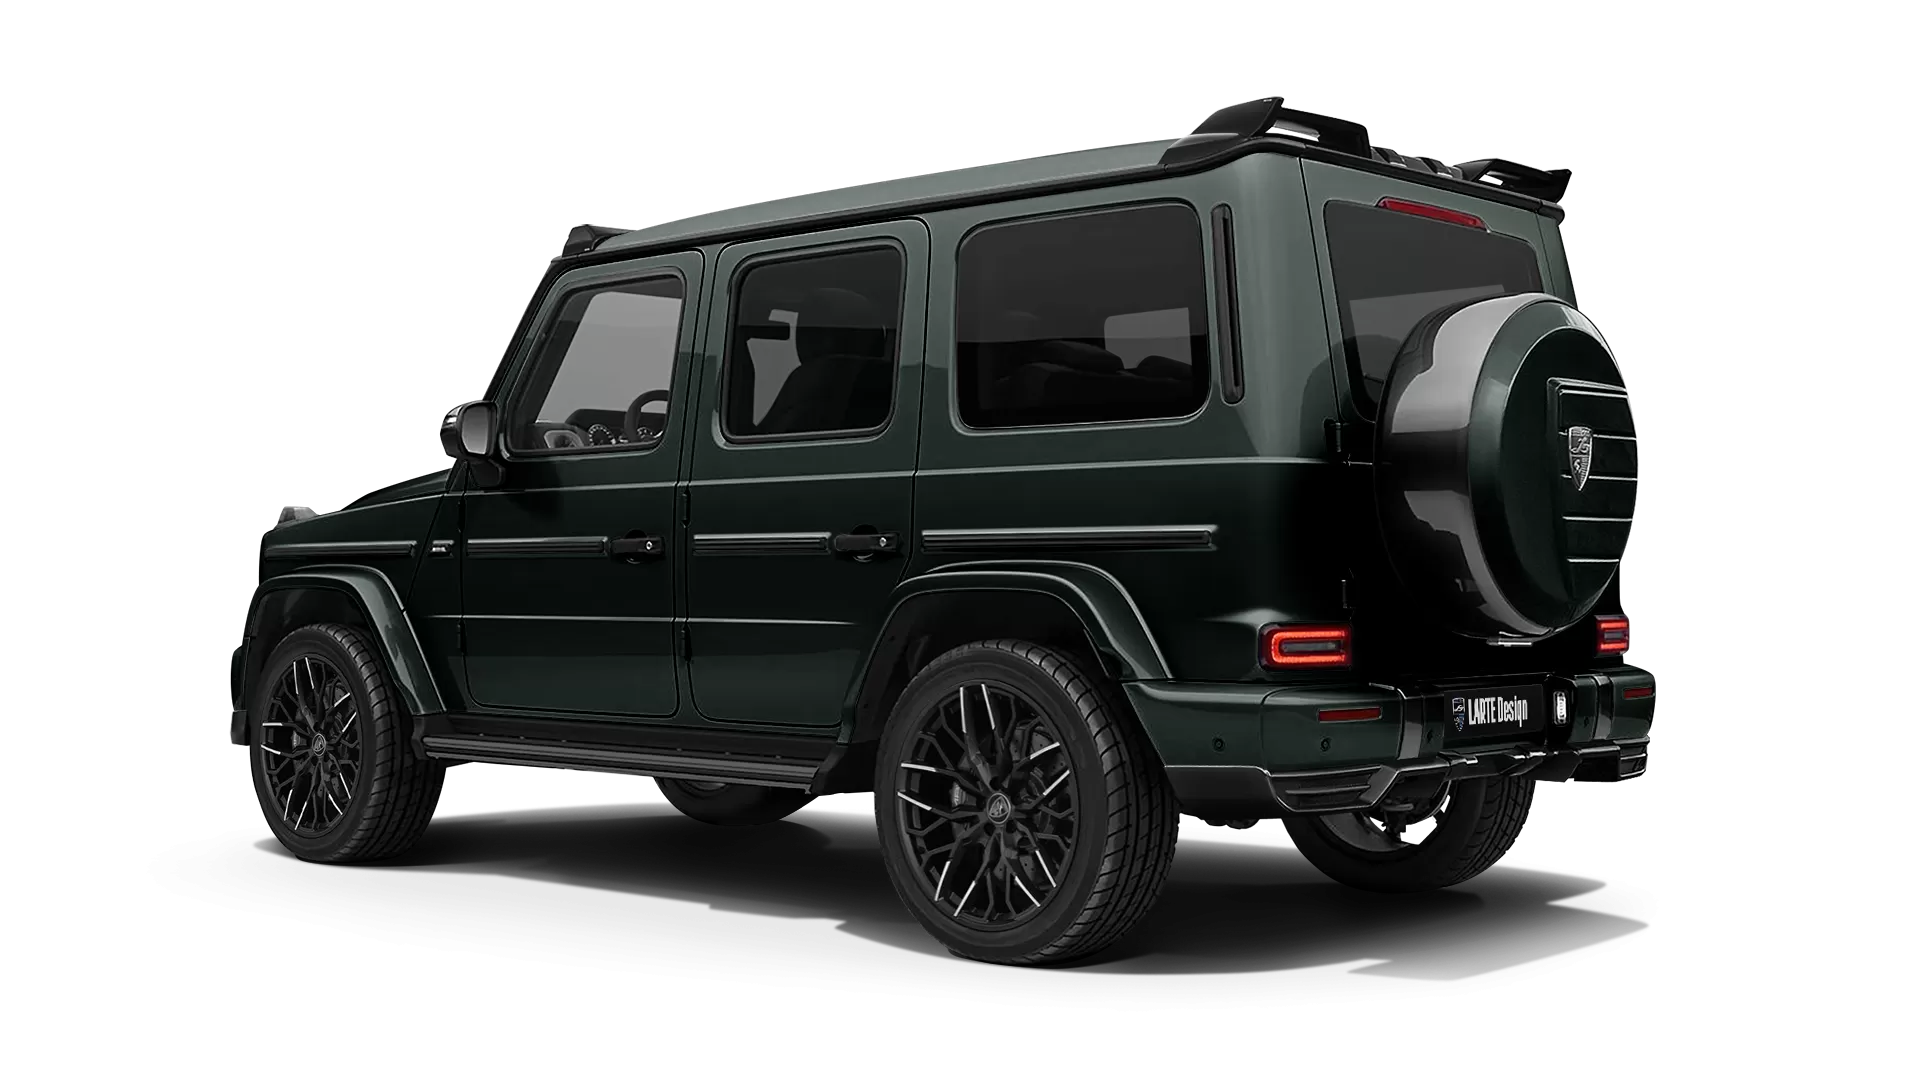 Mercedes G class W463 with painted body kit: rear view shown in Dark Green